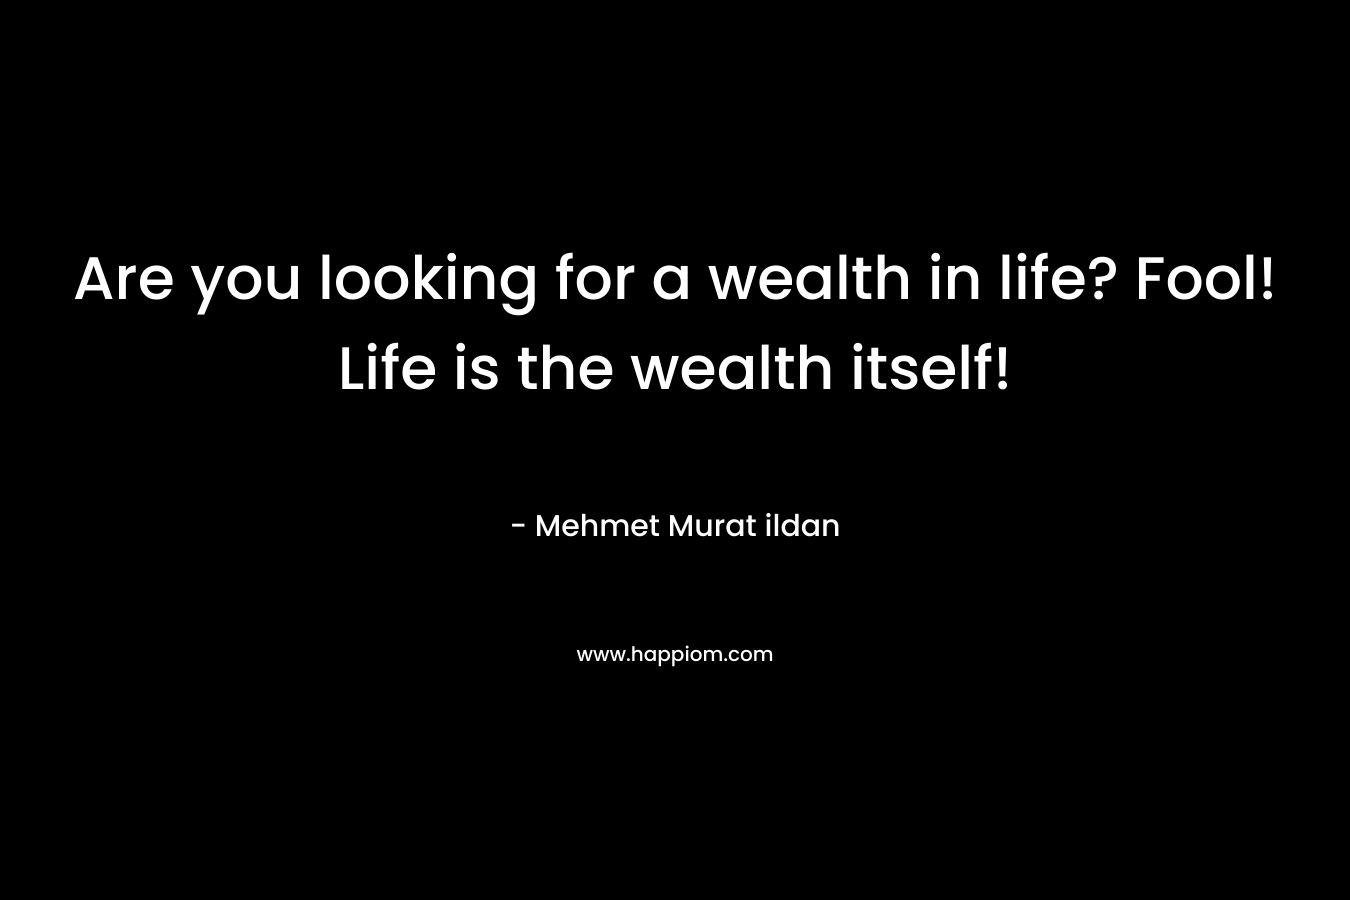 Are you looking for a wealth in life? Fool! Life is the wealth itself!